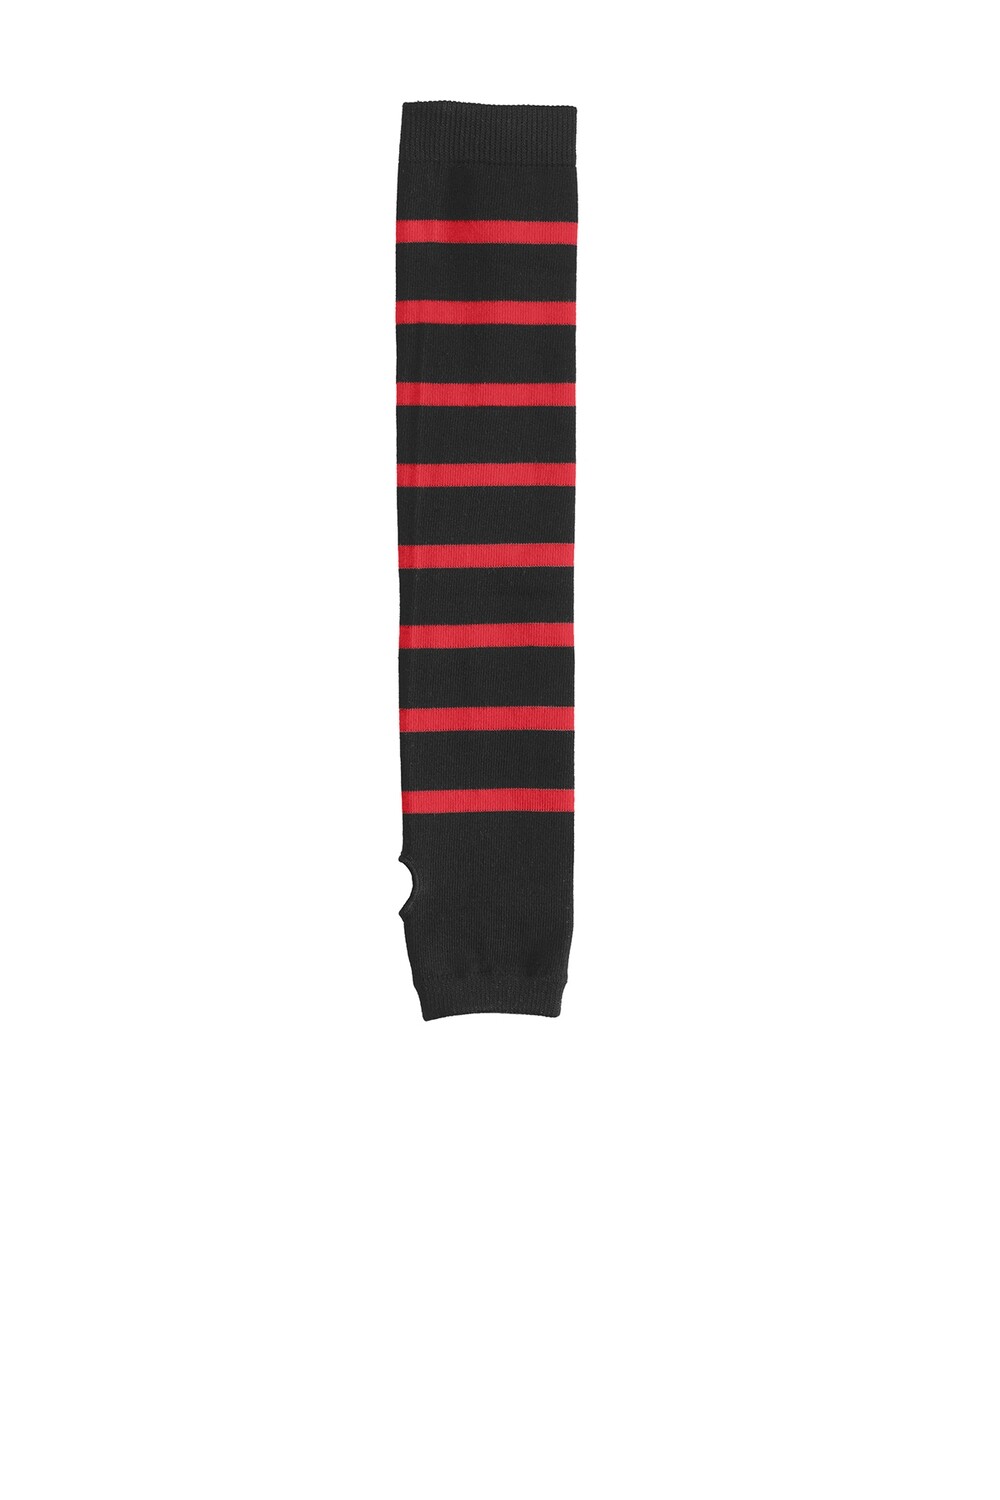 All FUN and WARM!!!  Striped ARM SOCKS-  You are buying a PAIR